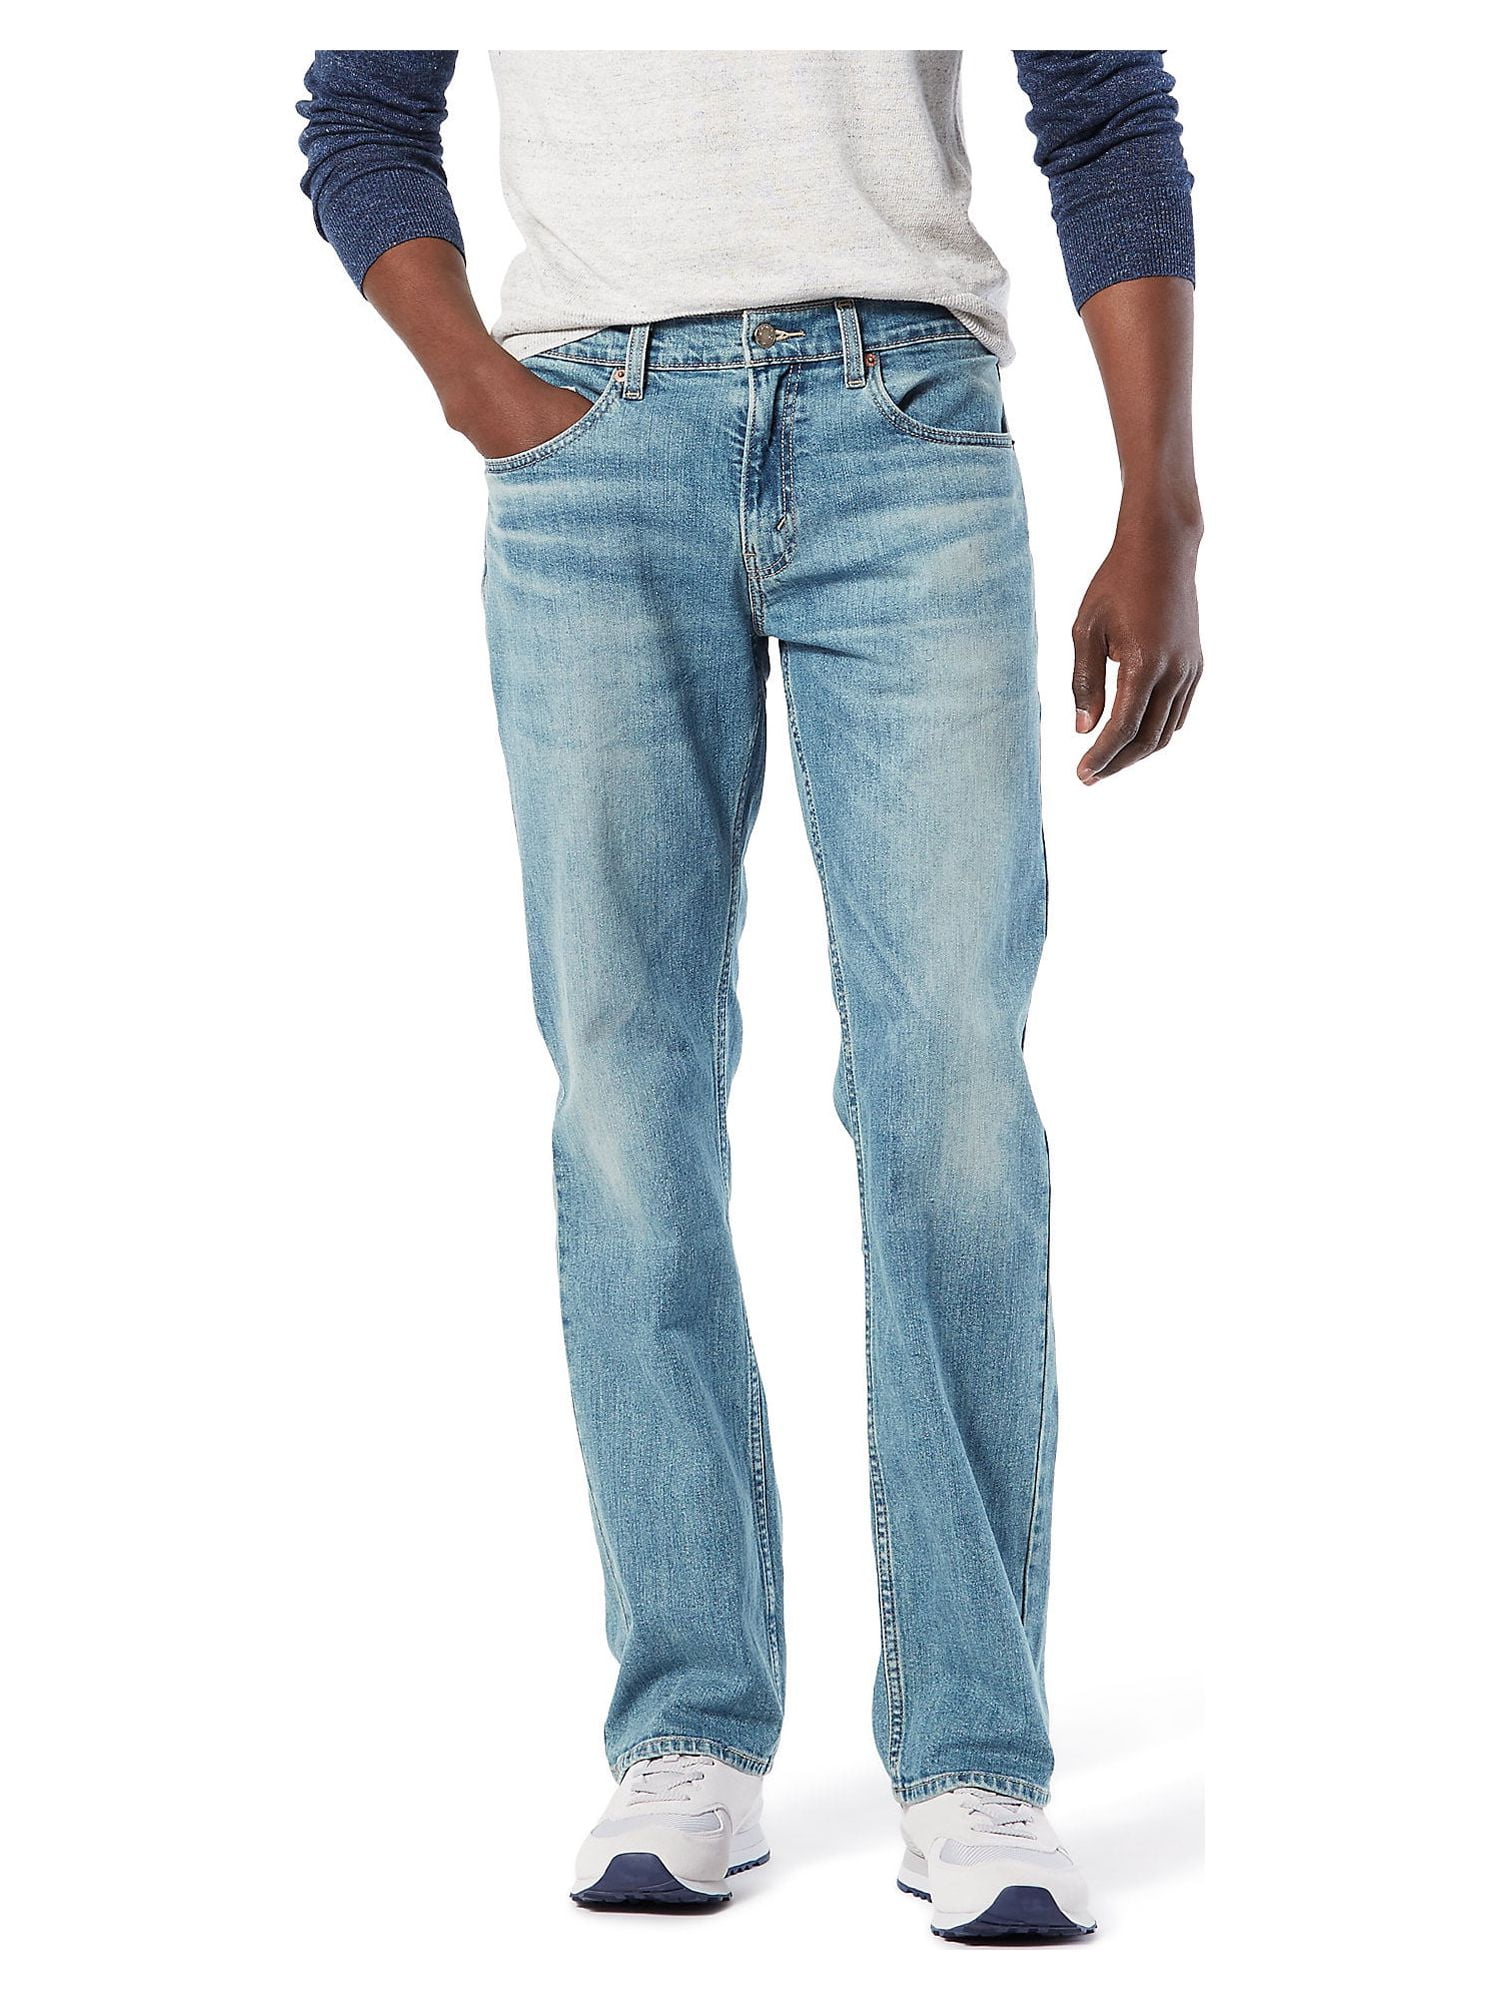 Signature By Levi Strauss Co Men S Relaxed Fit Jeans 9fc6e88f F908 4e6d A1e4 9cba7a3c8d6f.2ccf12f593f2cf84f0e2d1485e968ea5 